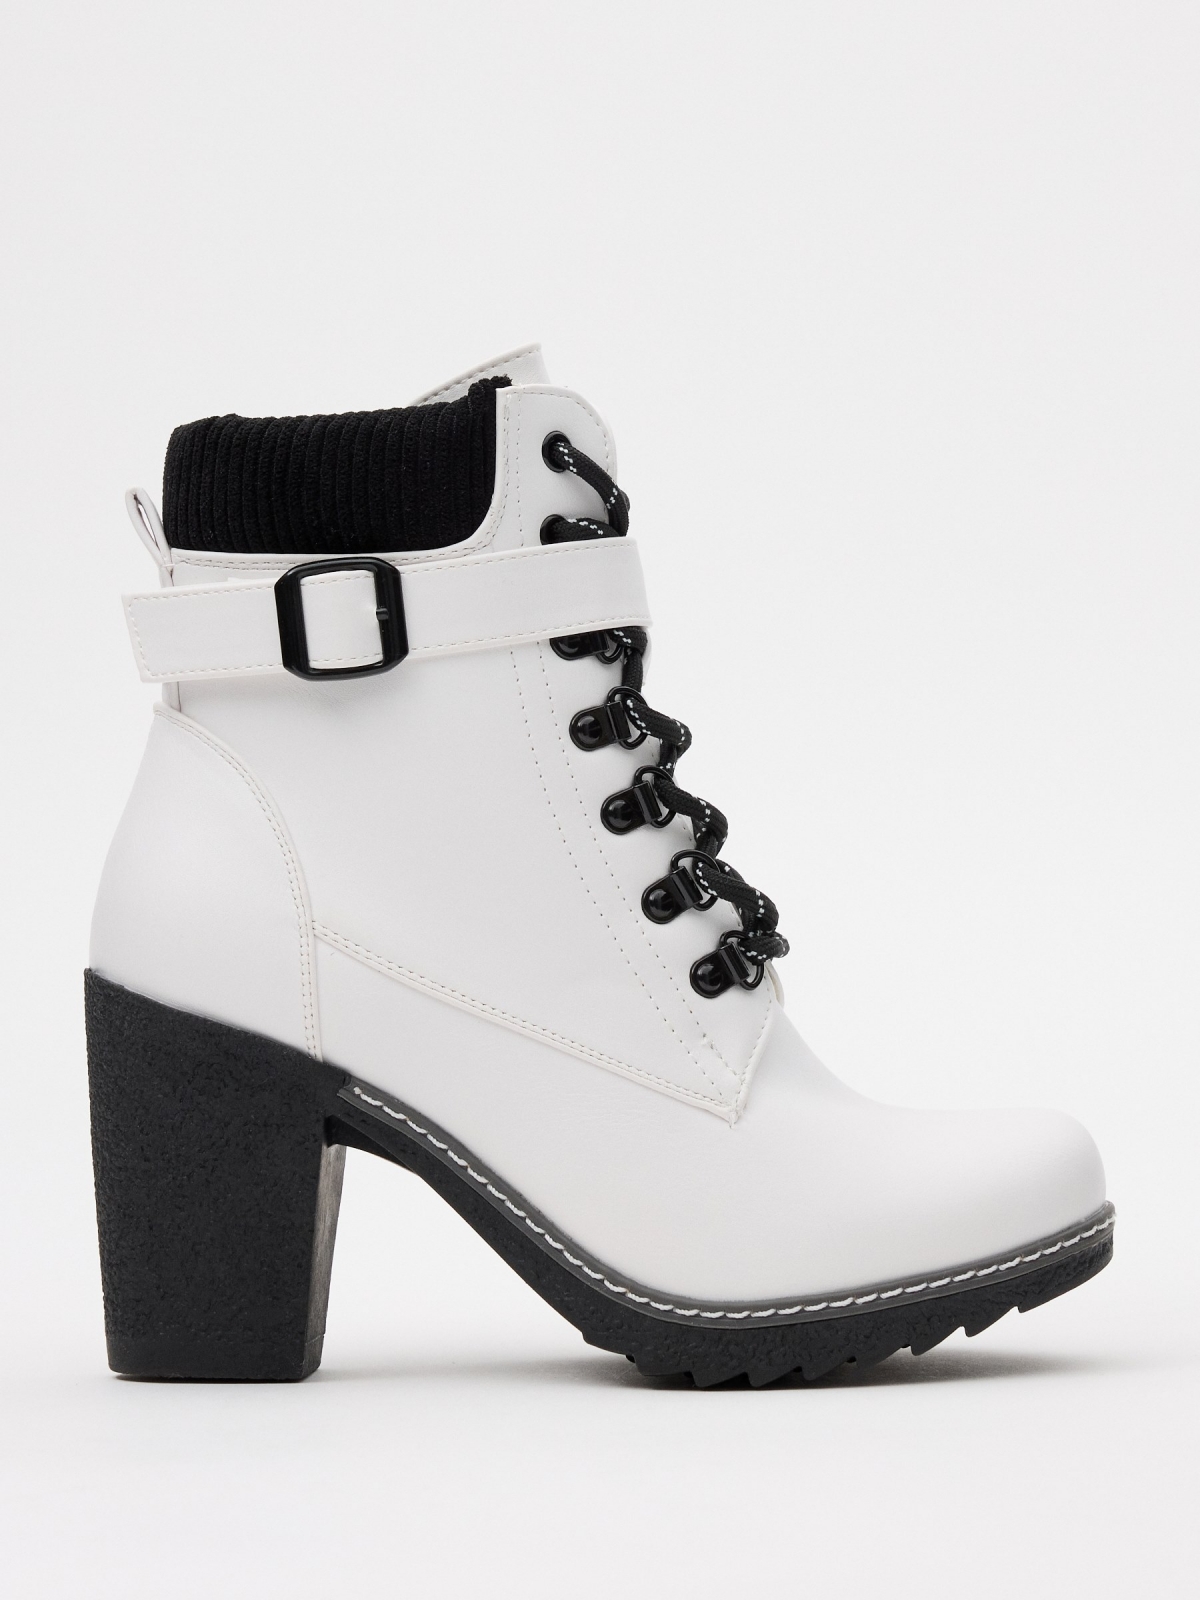 Black and white leatherette ankle boots white